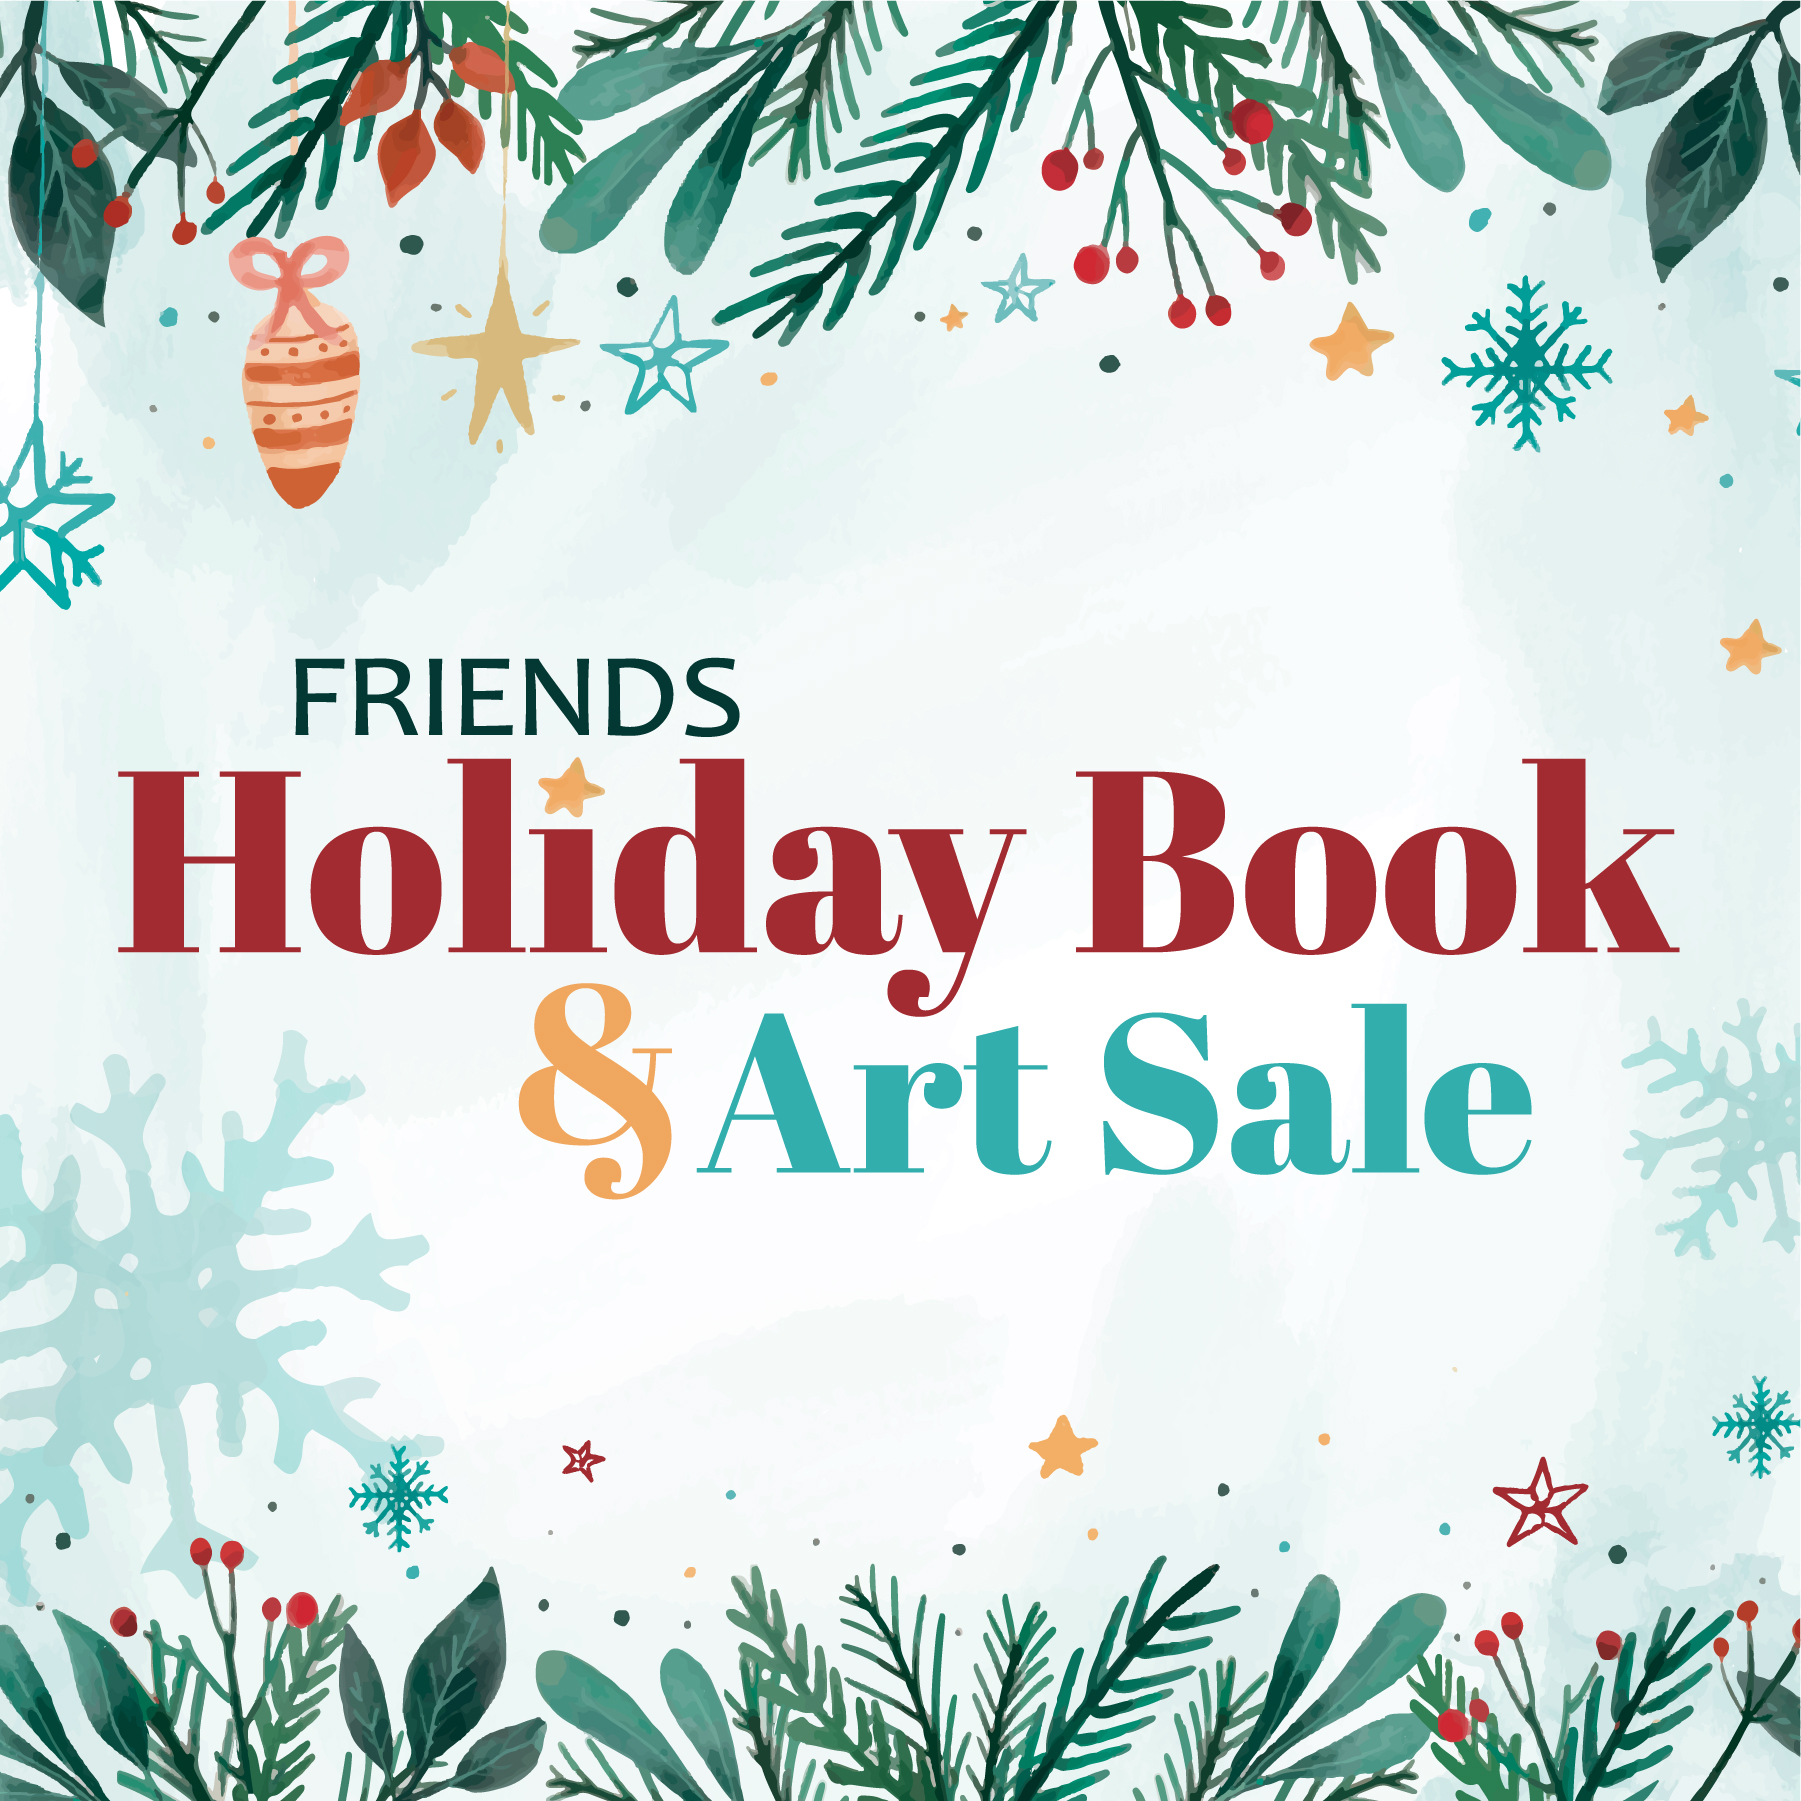 Friends Holiday Book Sale